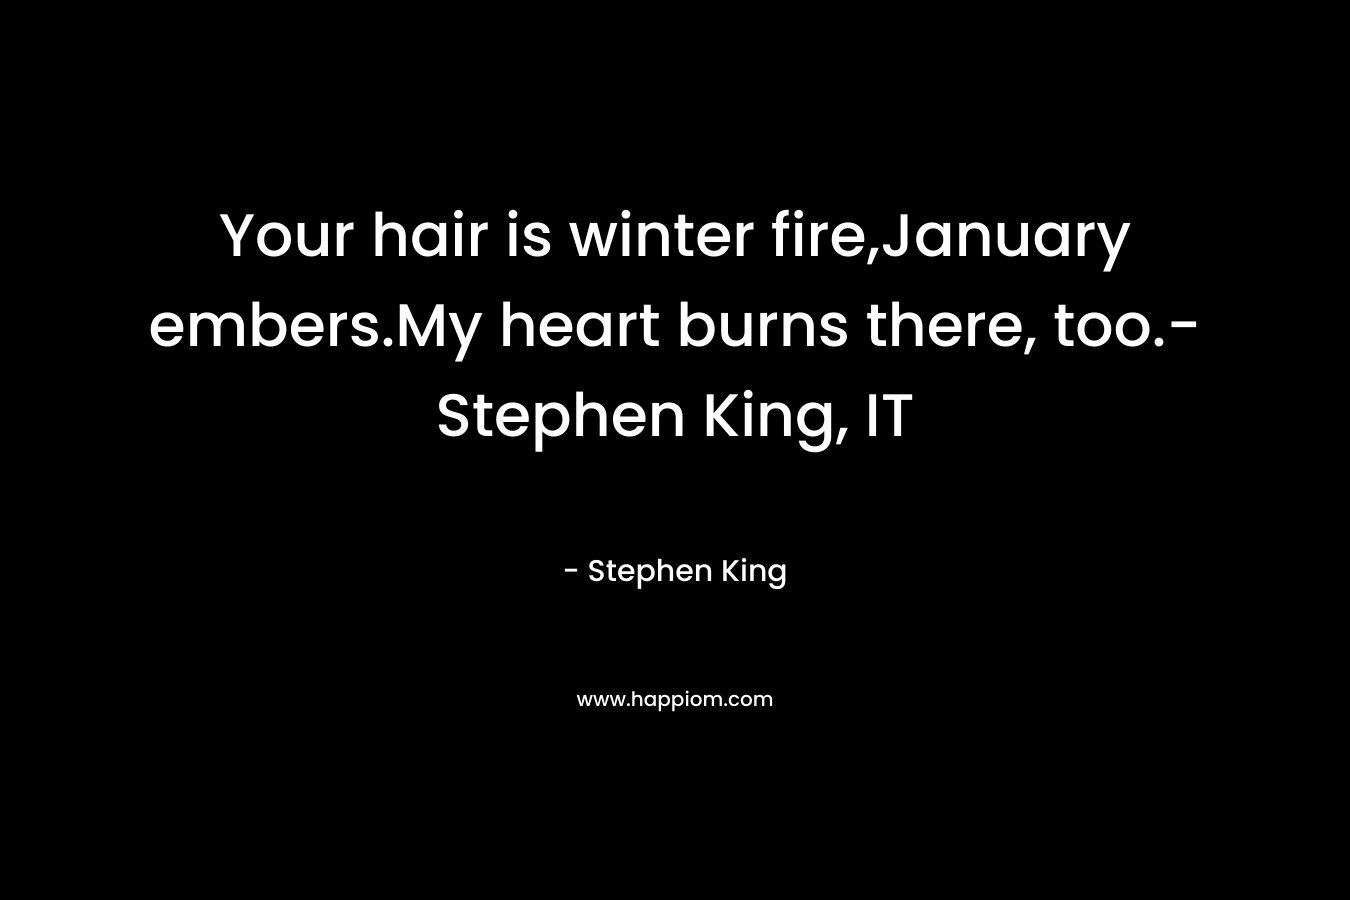 Your hair is winter fire,January embers.My heart burns there, too.-Stephen King, IT